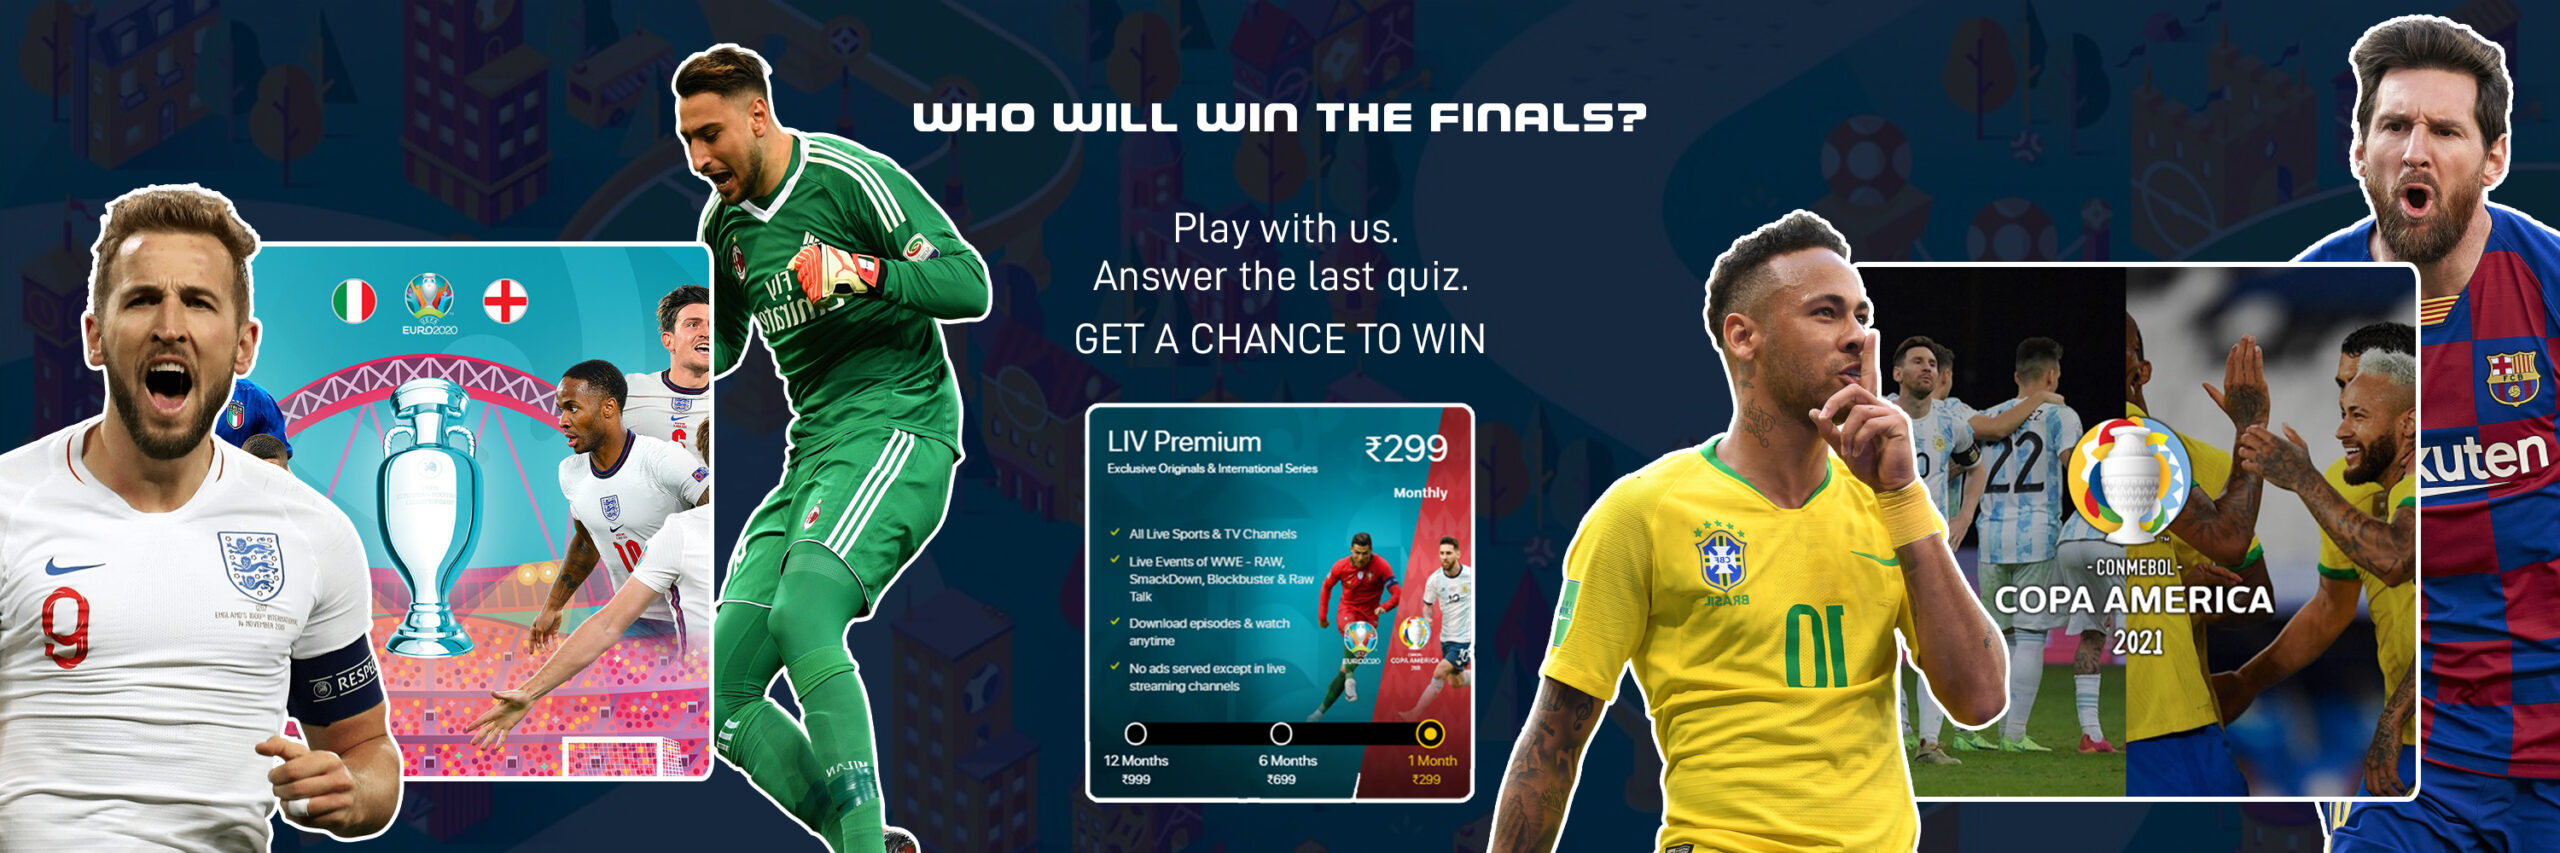 EURO Cup 2020-21 Final Contest. Play and Win an exciting prize.